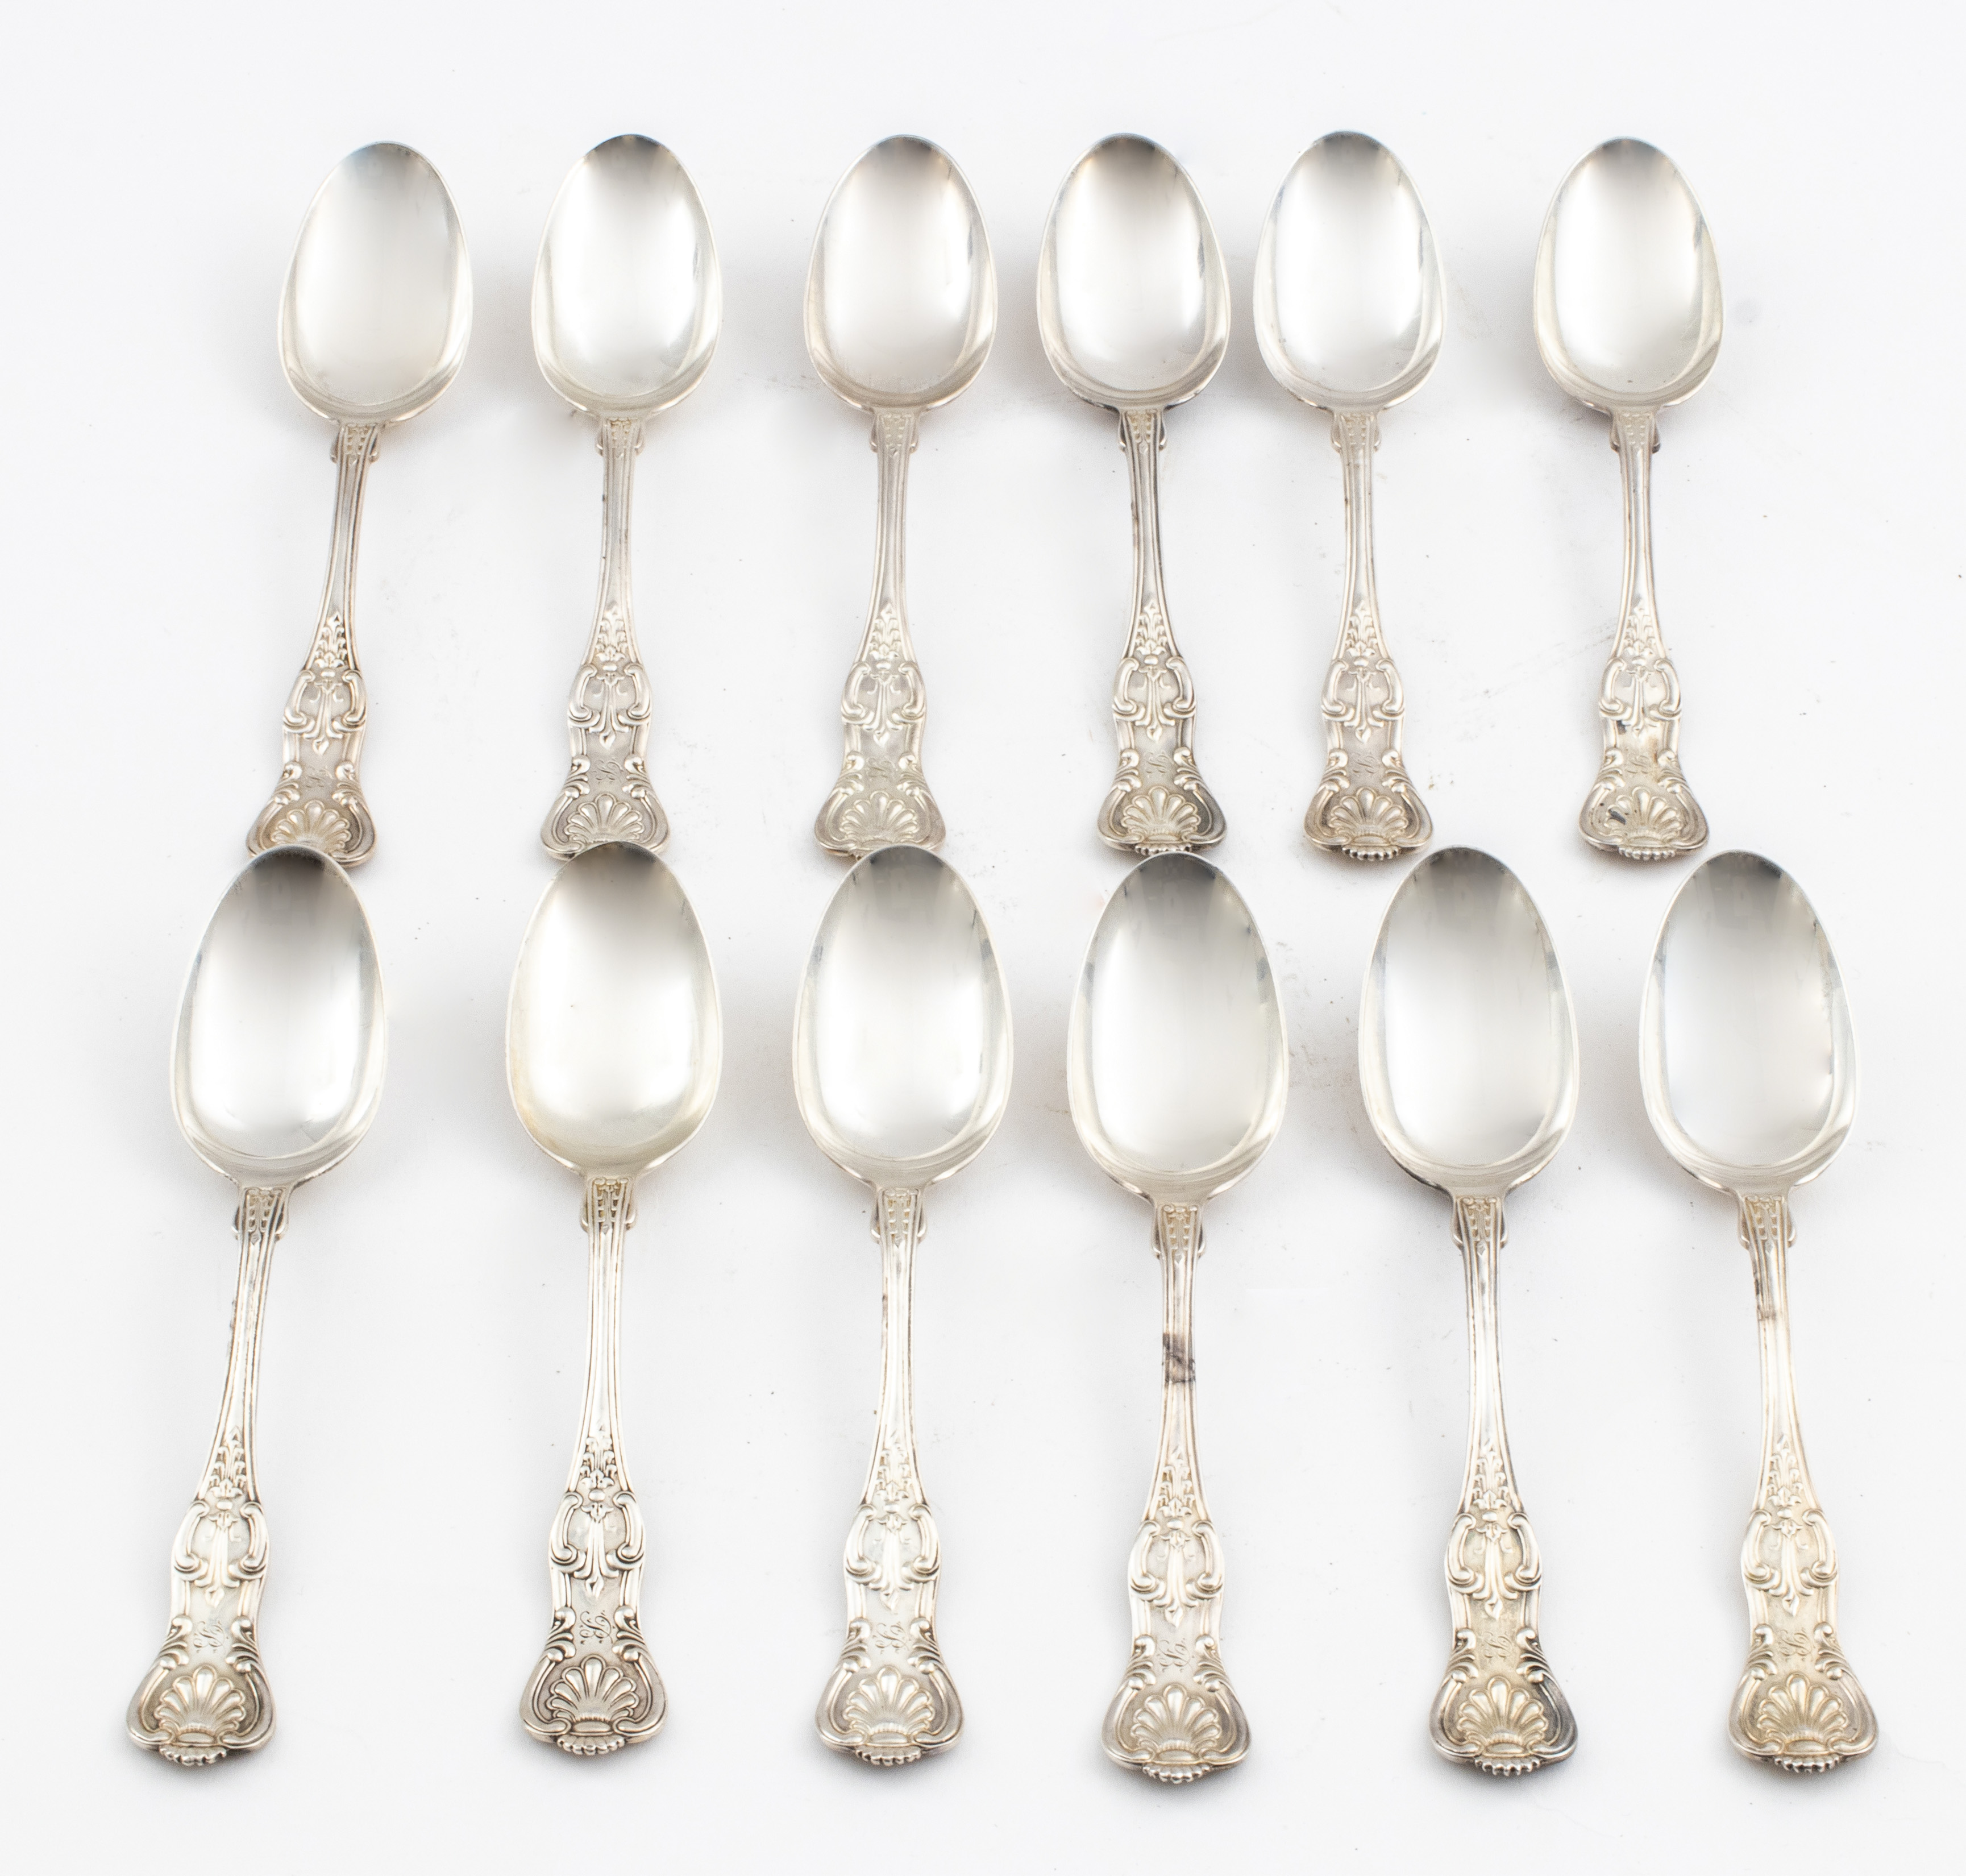 STERLING SILVER SOUP SPOONS, 12 Set